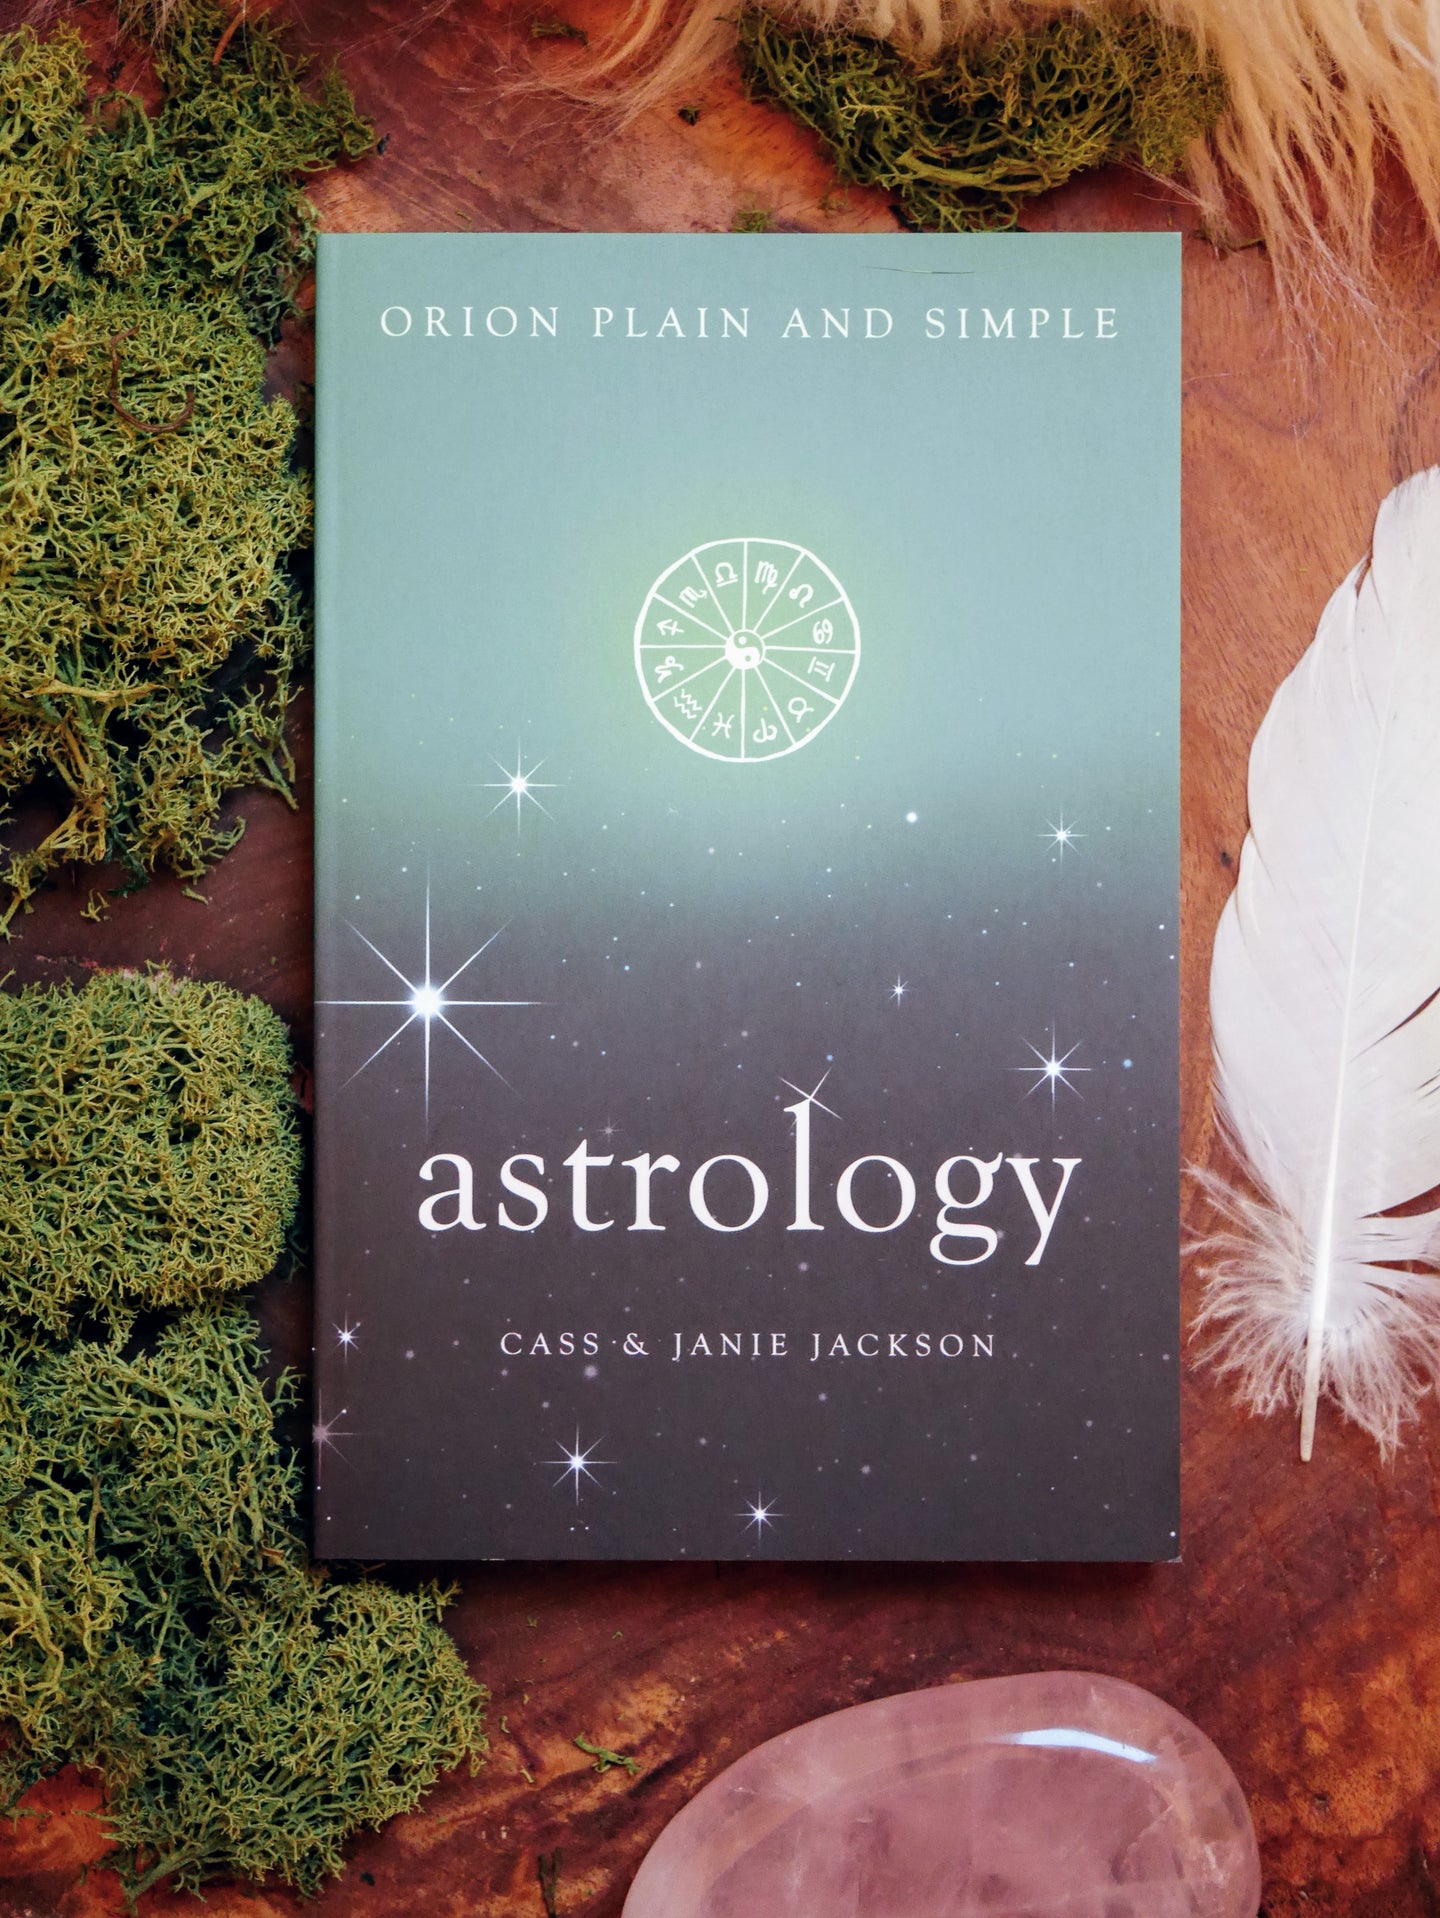 Astrology, Orion plain and simple